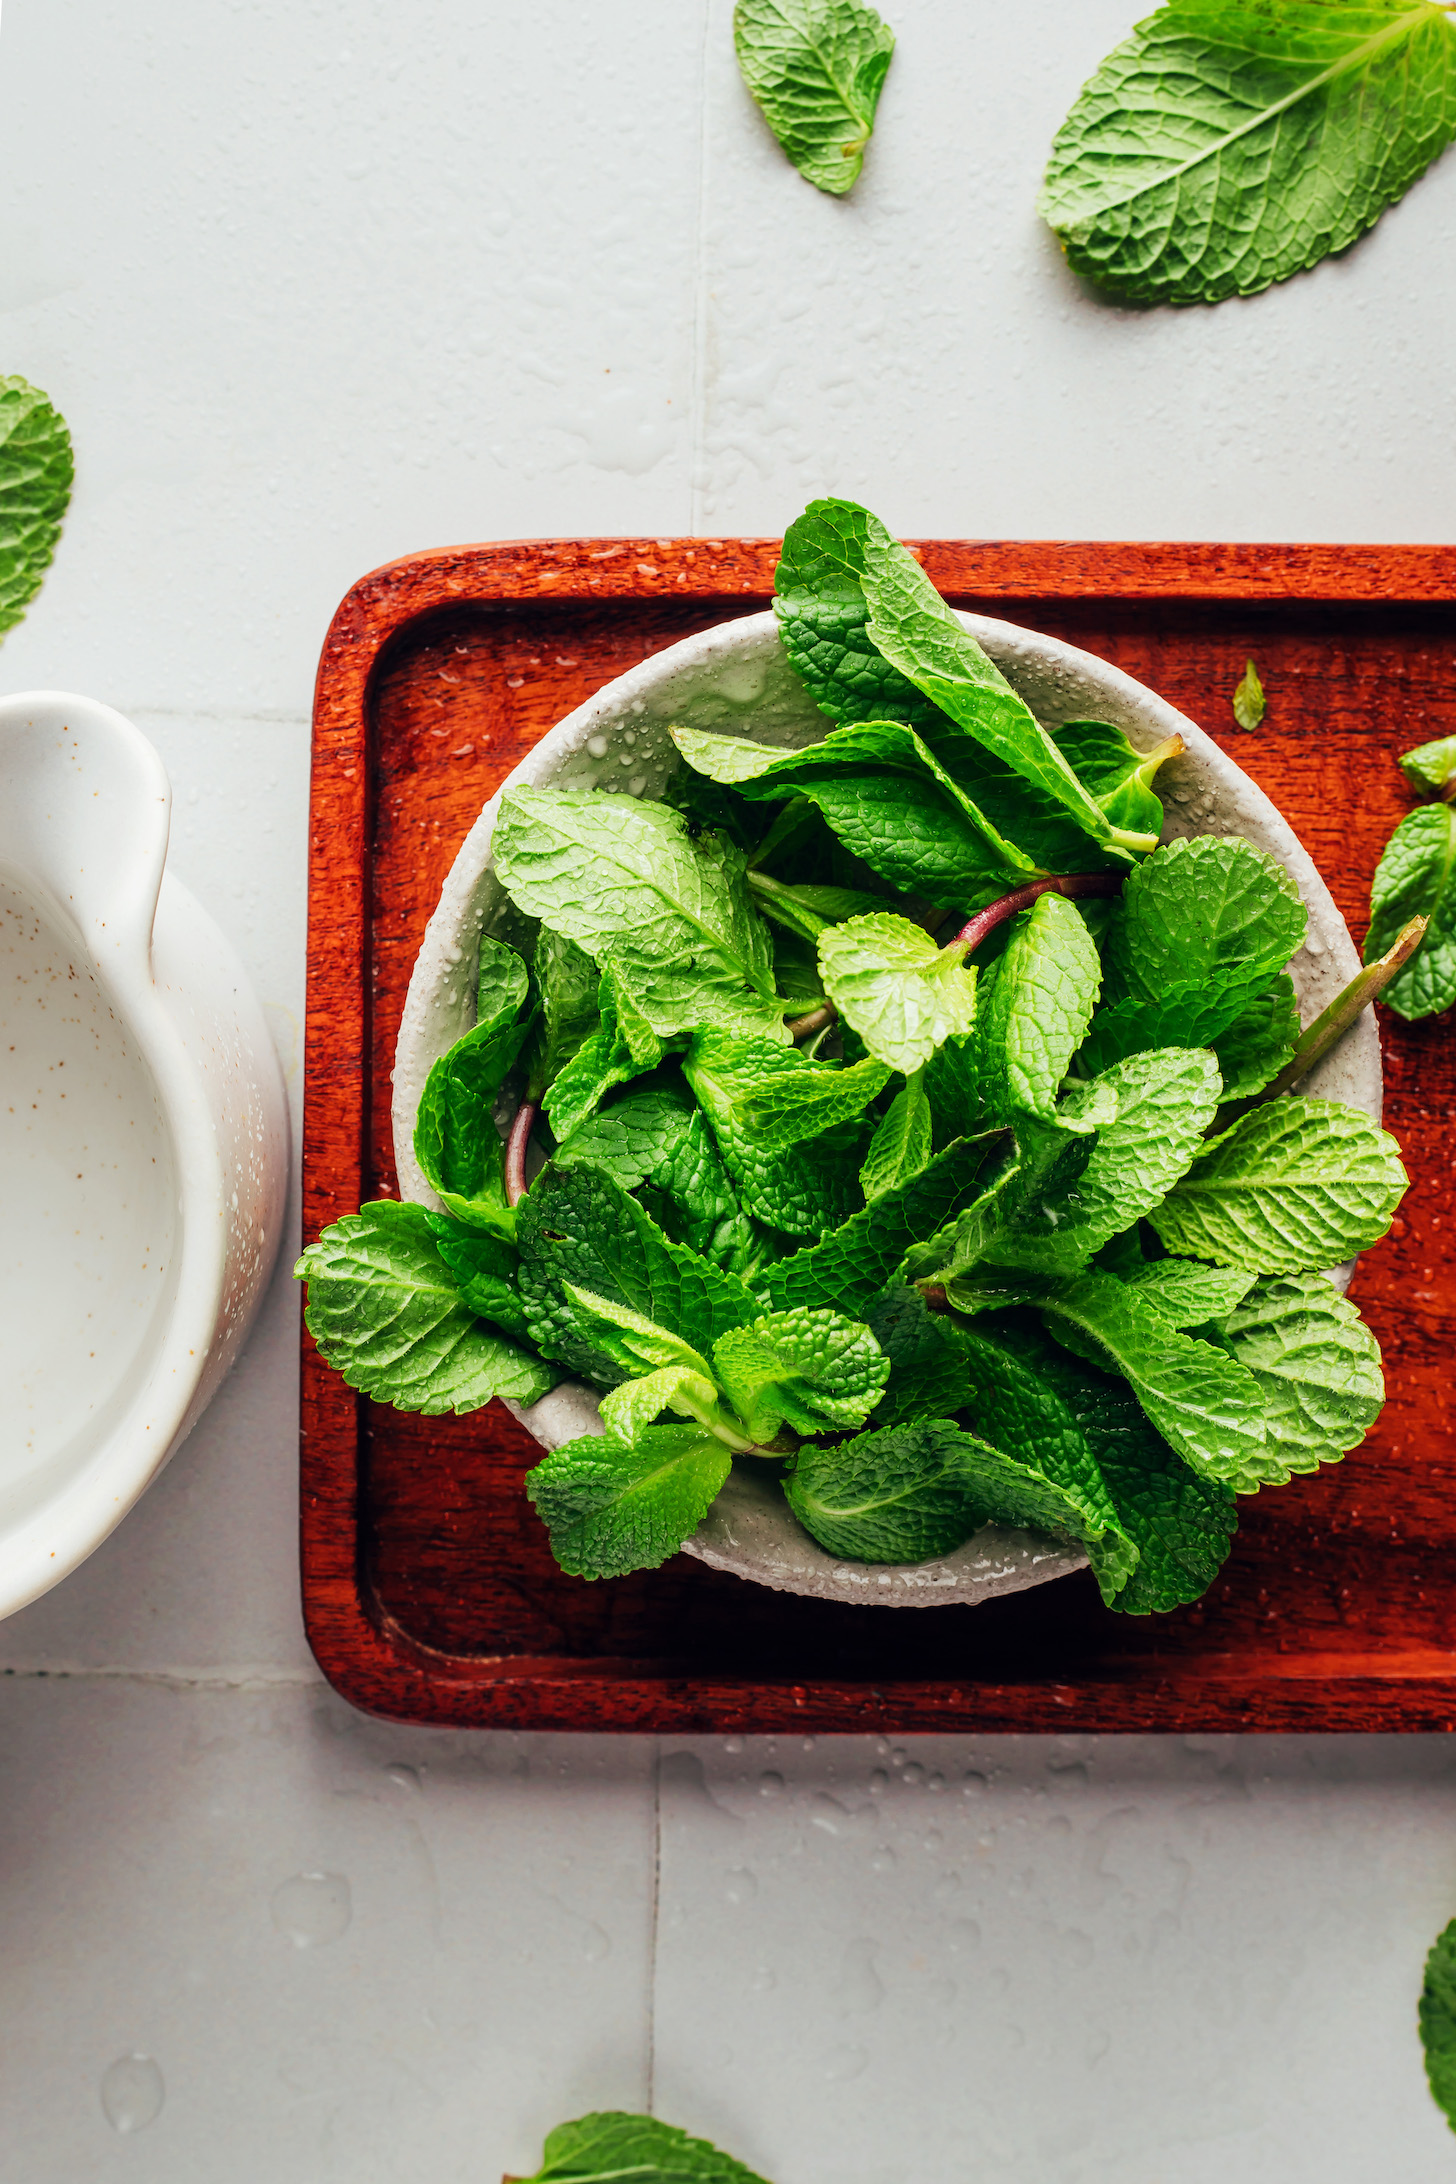 Bowl of water next to a bowl of fresh spearmint leaves